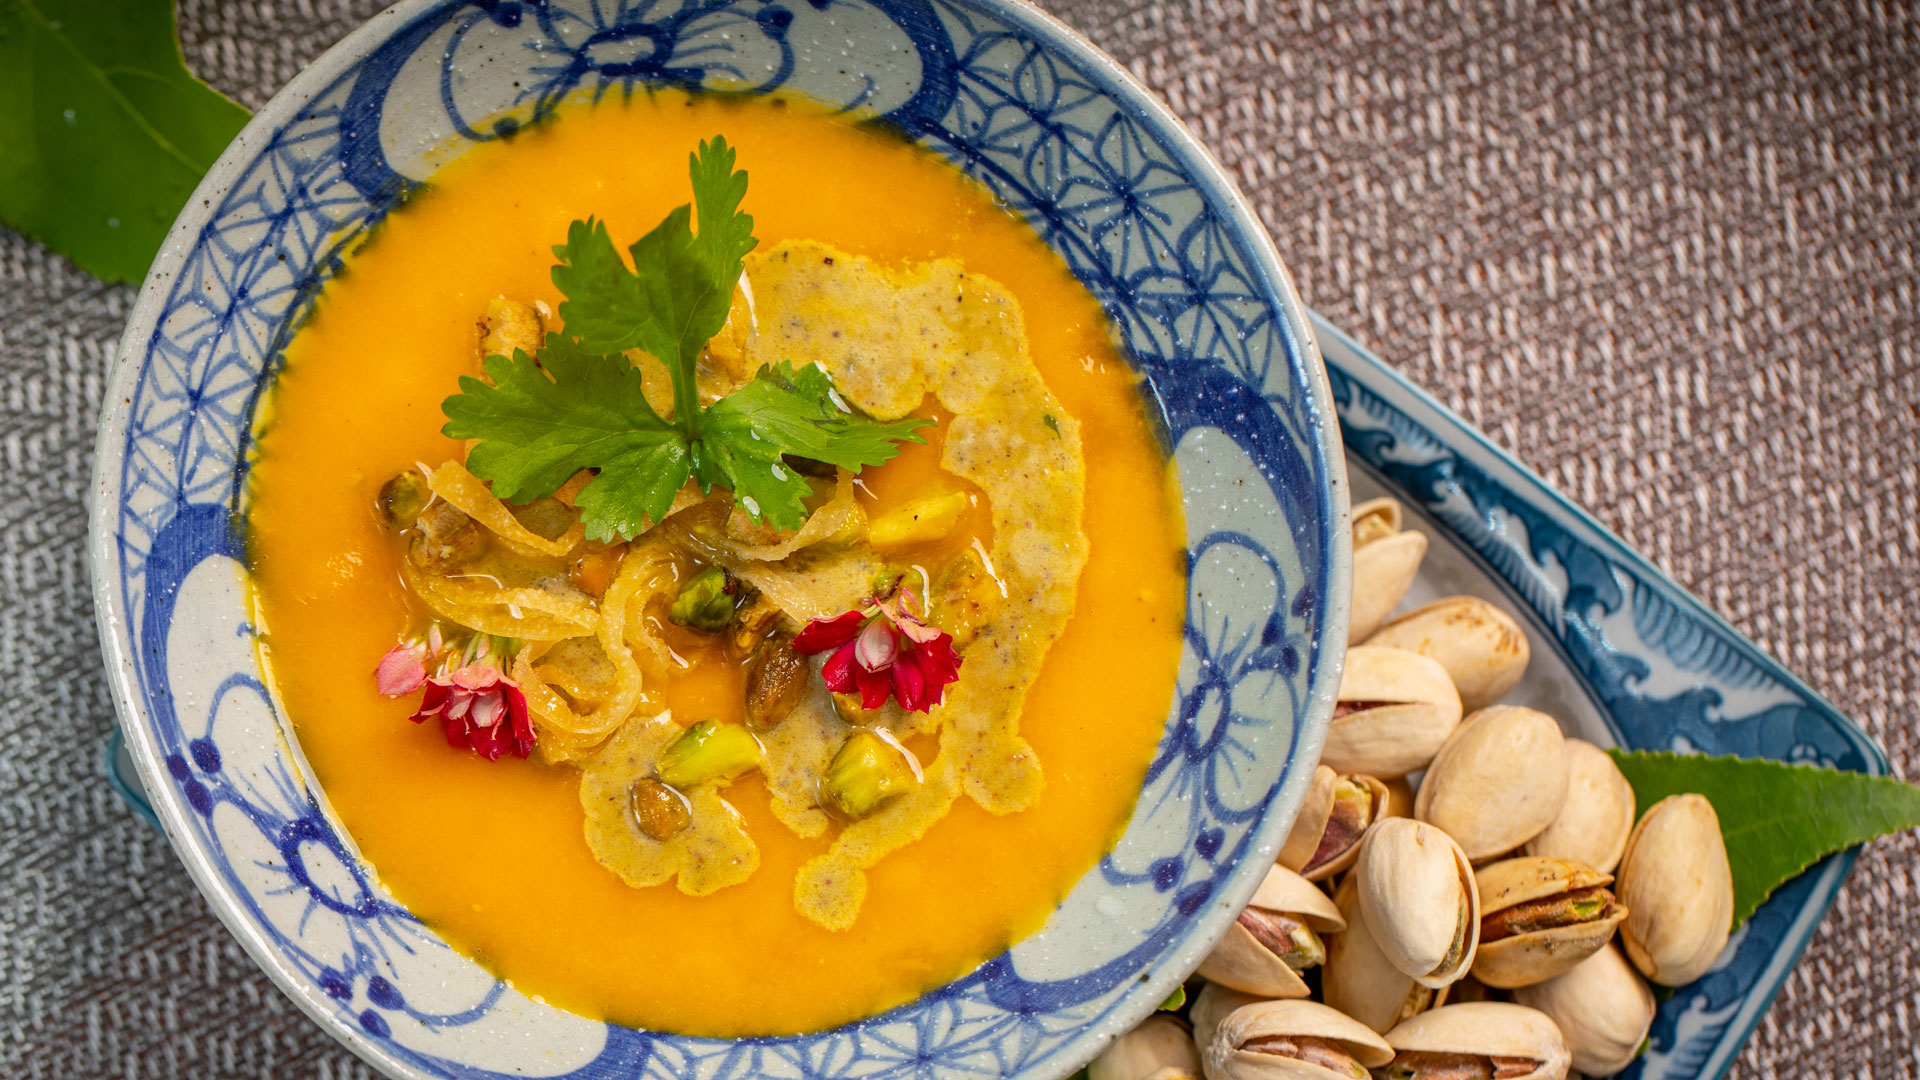 Creamy Carrot Ginger Soup with California Pistachios